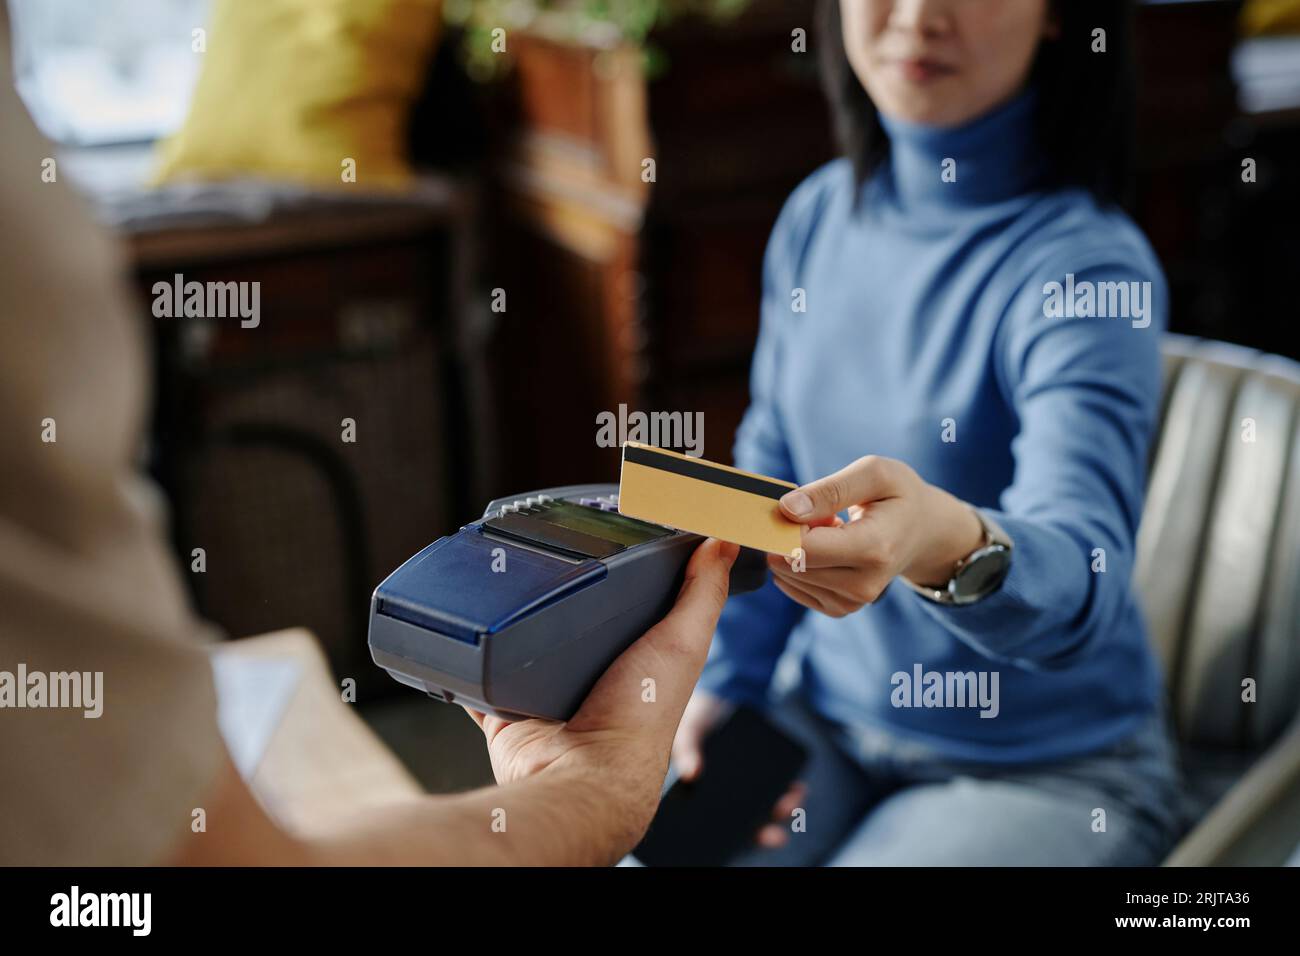 Woman paying through credit card on machine at cafe Stock Photo